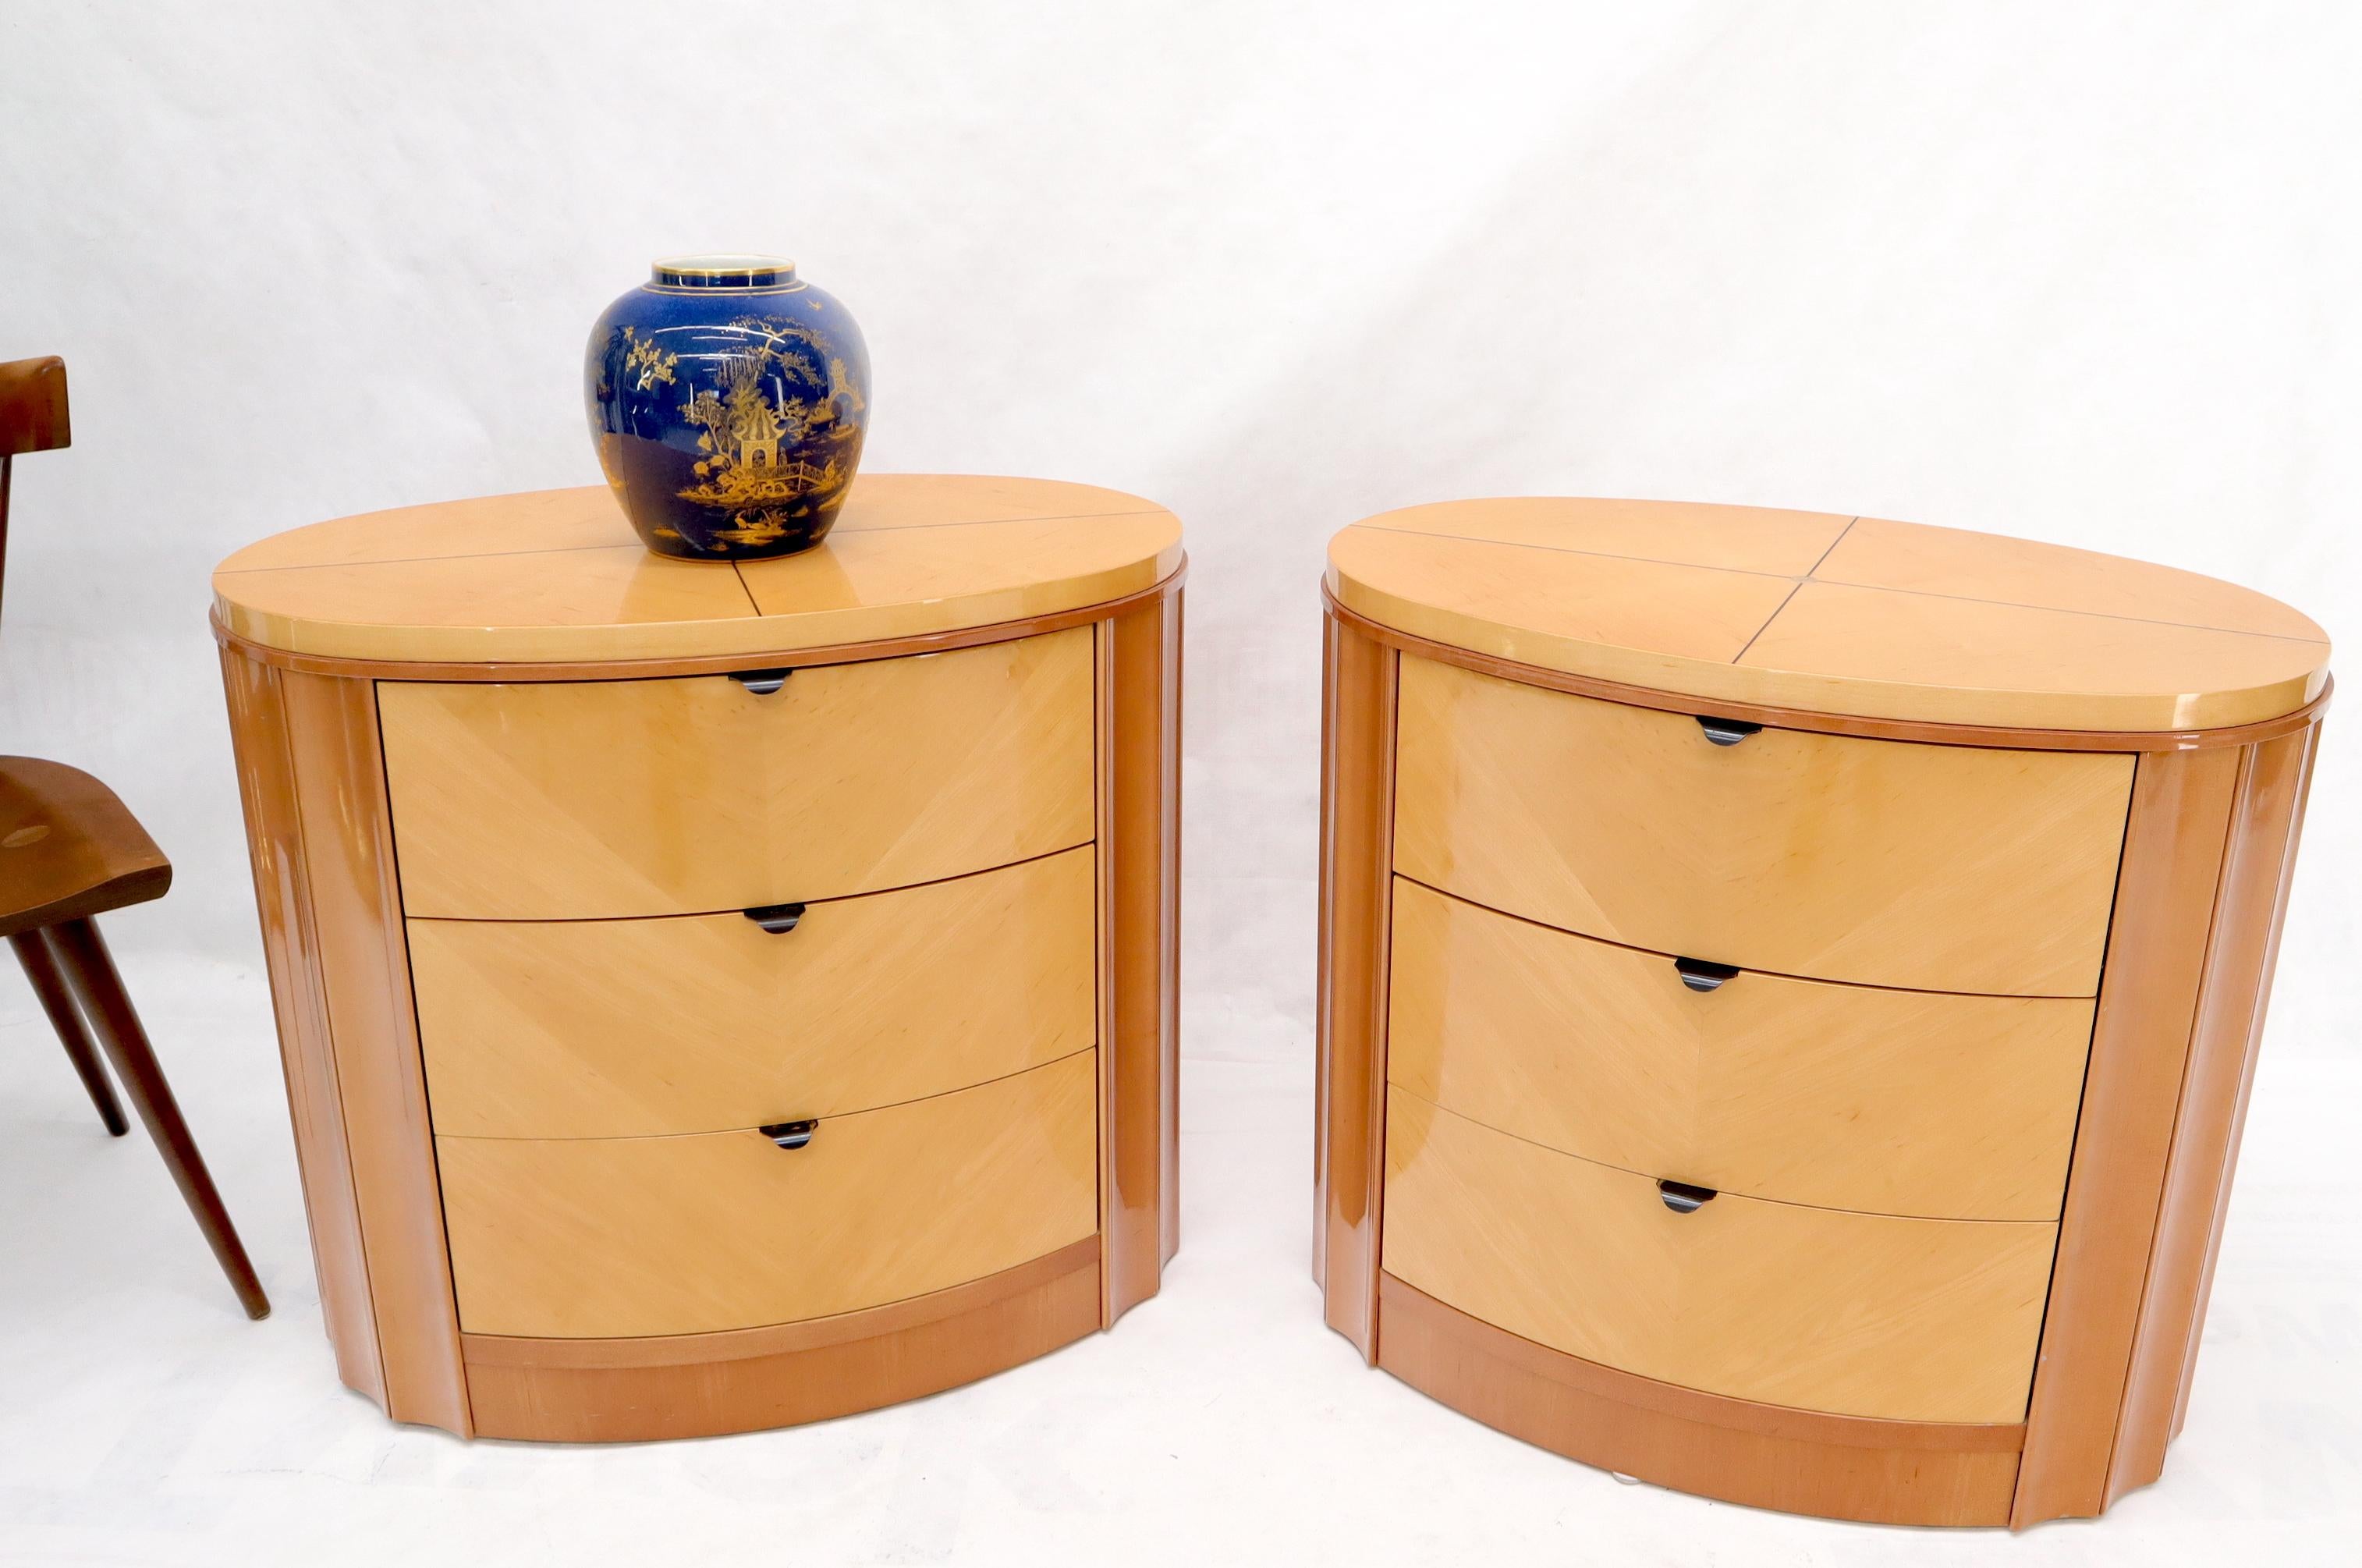 20th Century Pair of Oval Shape Scallop Sides Inlaid Top 3-Drawer Nightstands End Tables